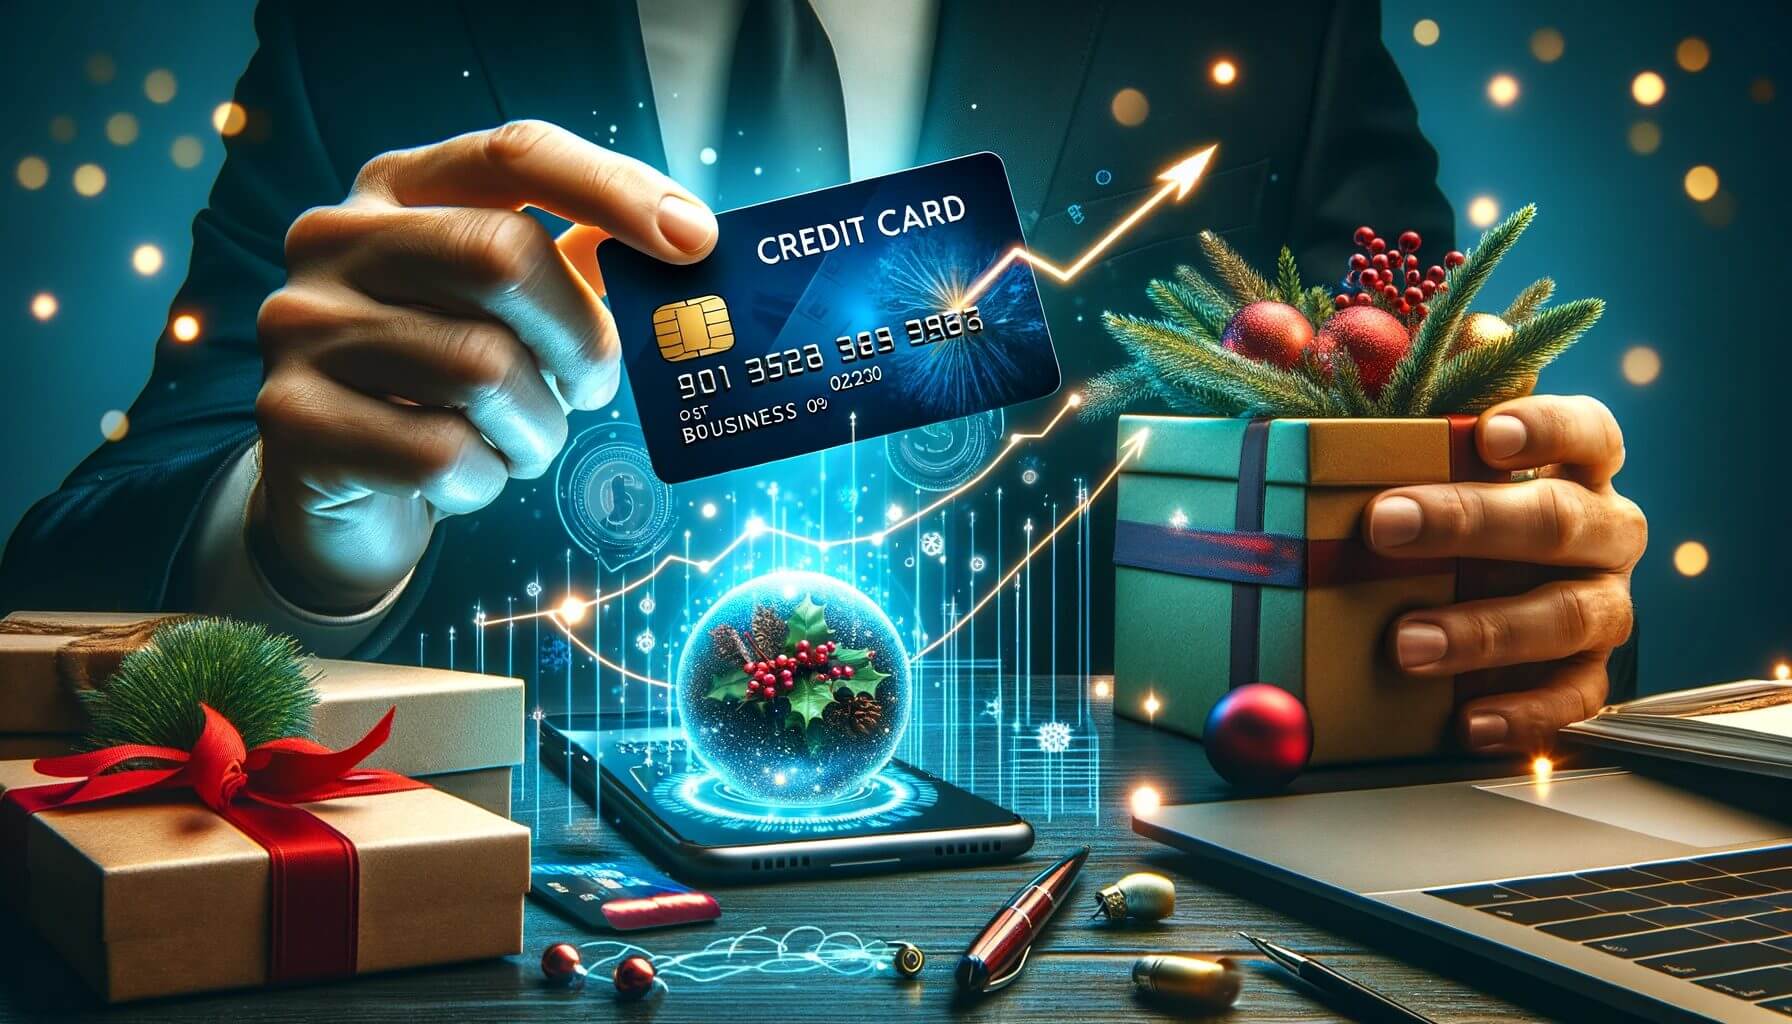 Card Use Expected to Be Up This Holiday Season: Is Your Business Ready?